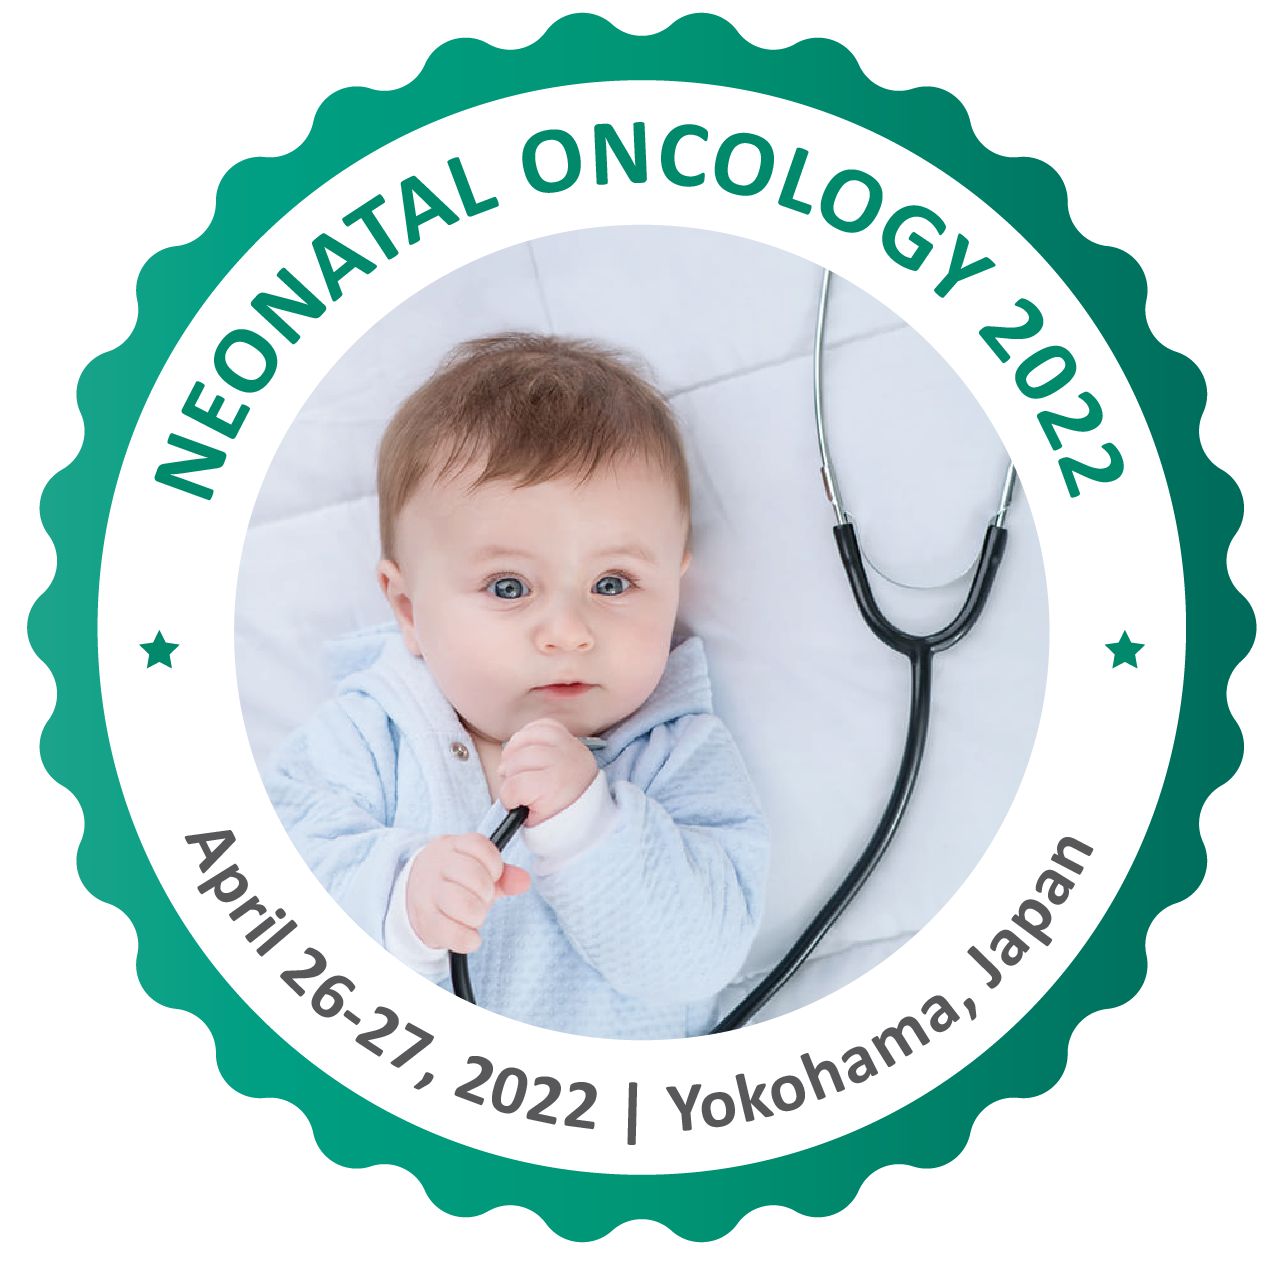 cs/upload-images/neonatal_oncology2022-46165.png